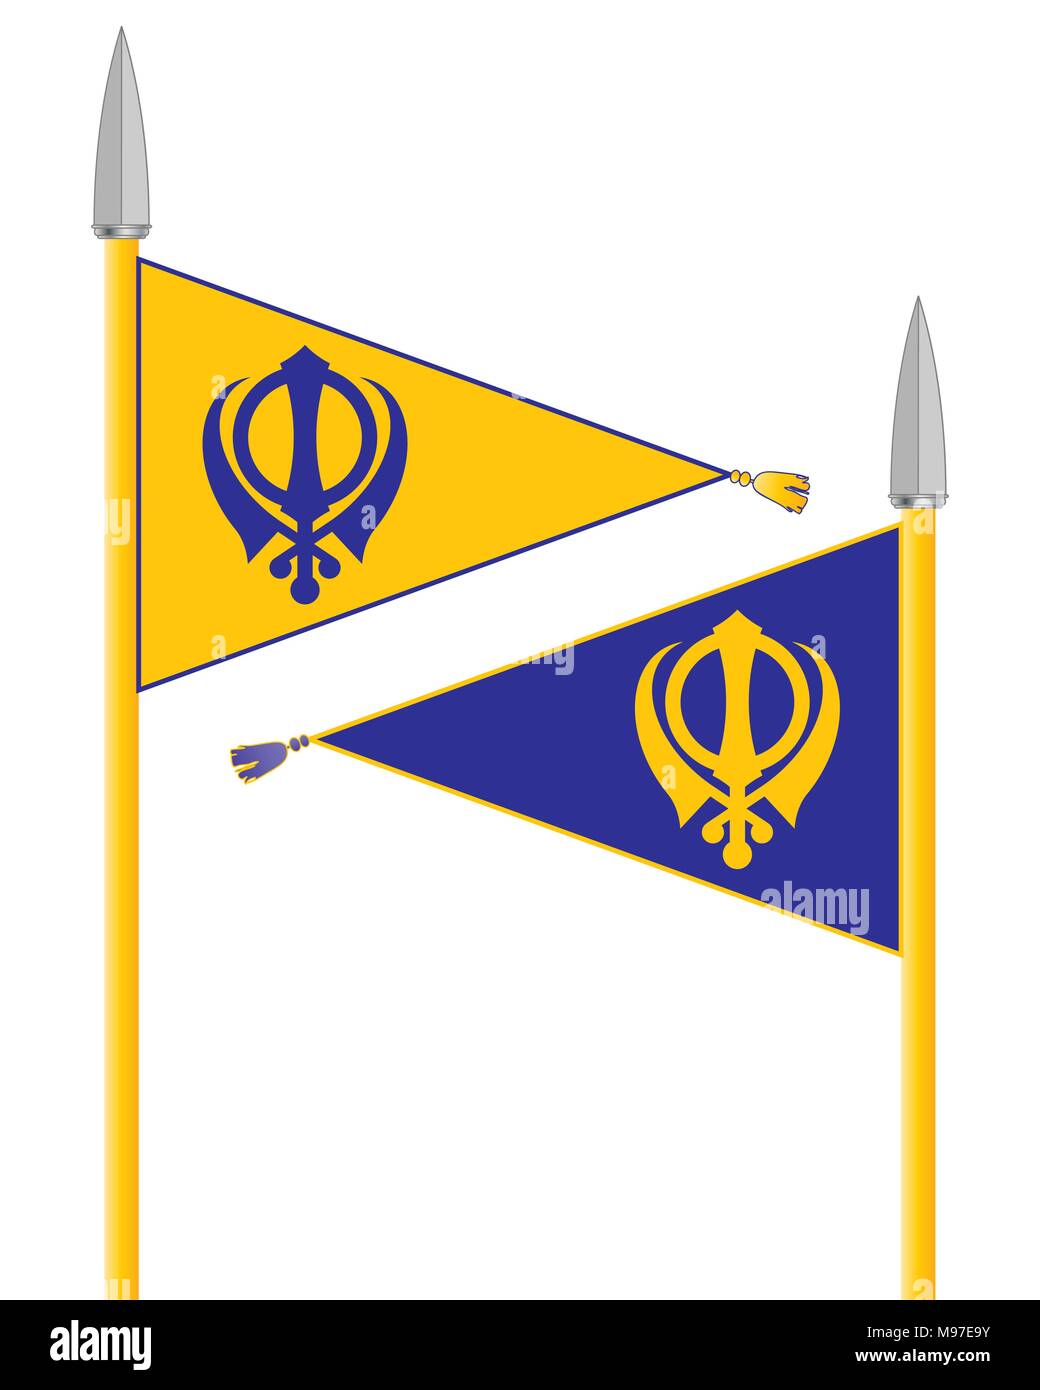 an illustration of the nishan sahib the flag of the sikhs in saffron and blue with spear poles on a white background Stock Vector